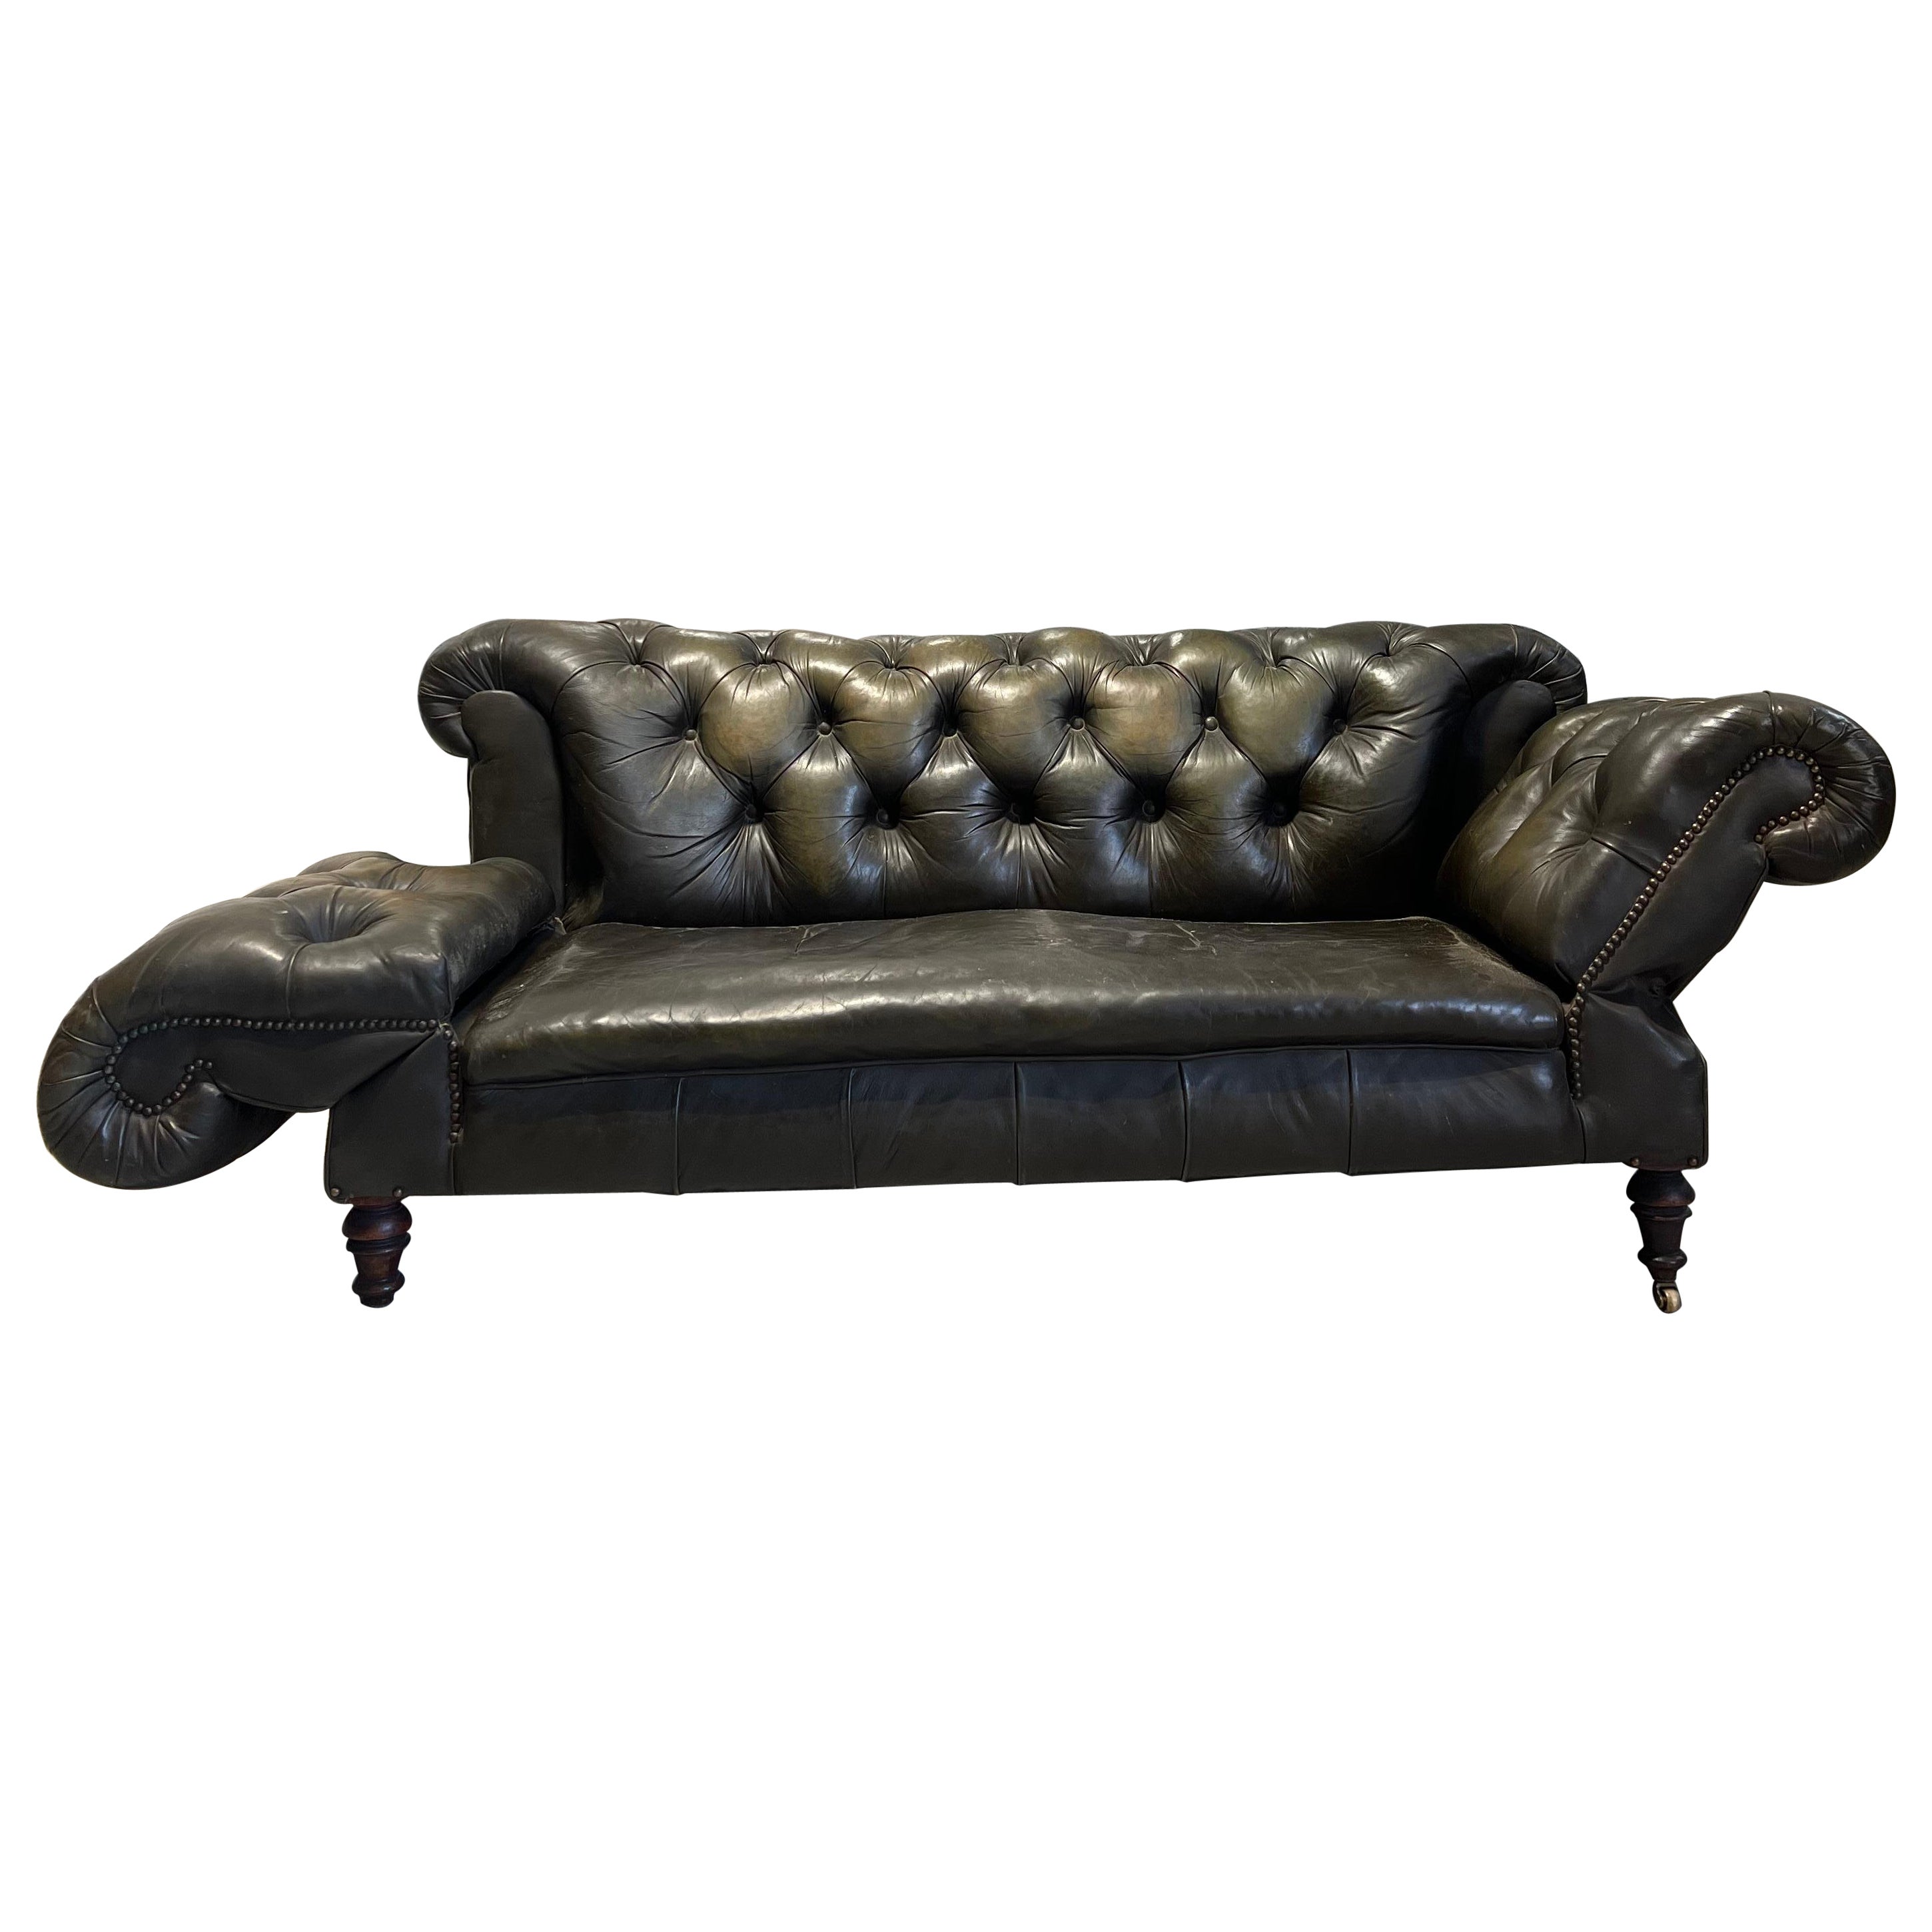 Antique 19thC Chesterfield Sofa in Beautiful Patinated Leather